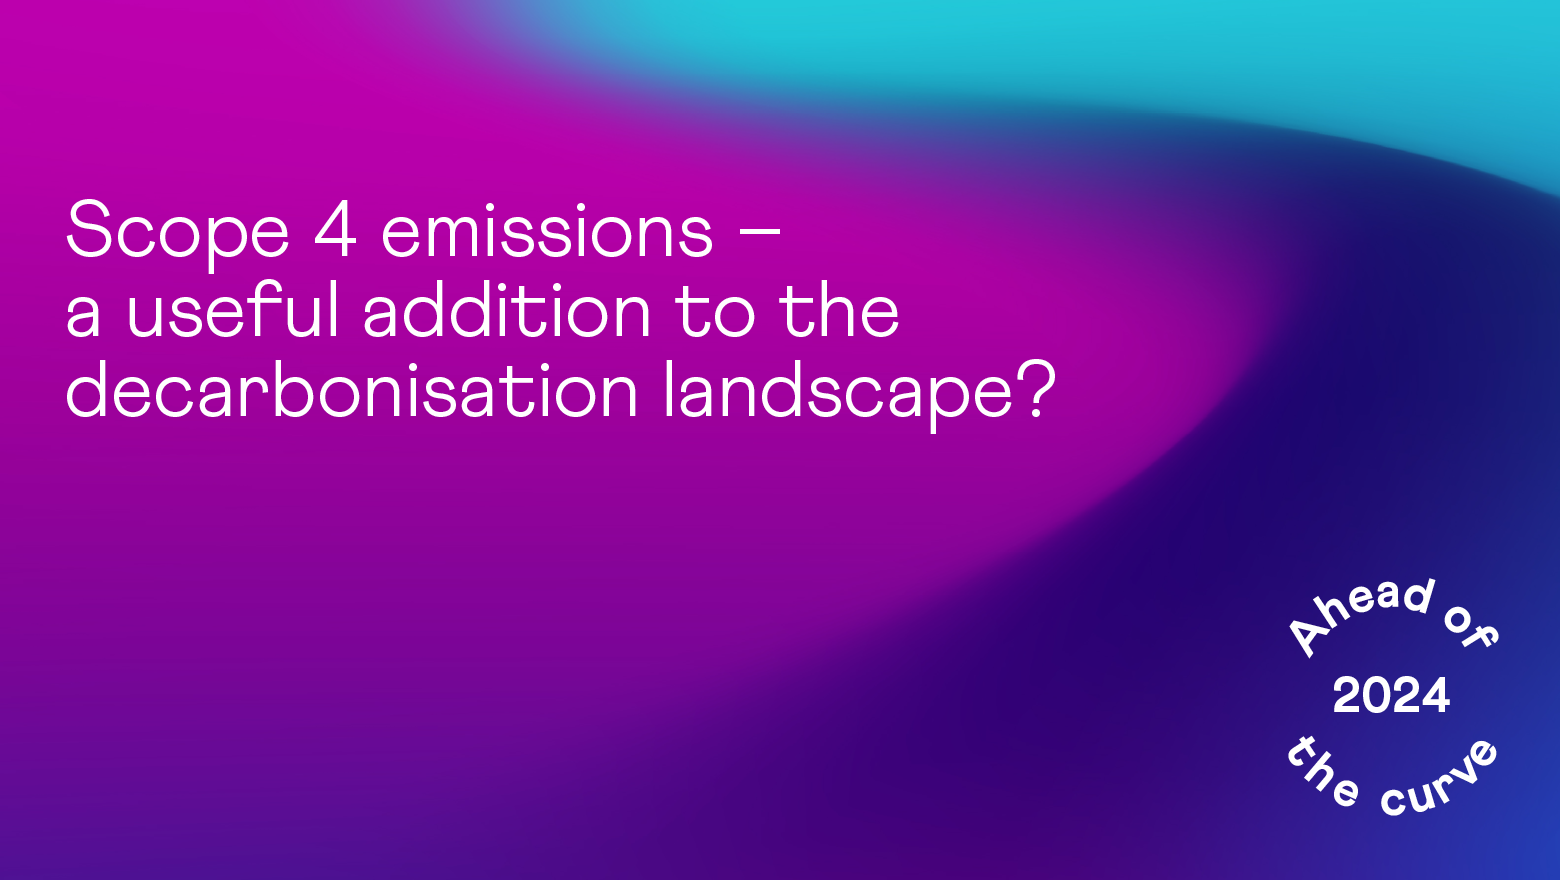 Scope 4 emissions – a useful addition to the decarbonisation landscape?